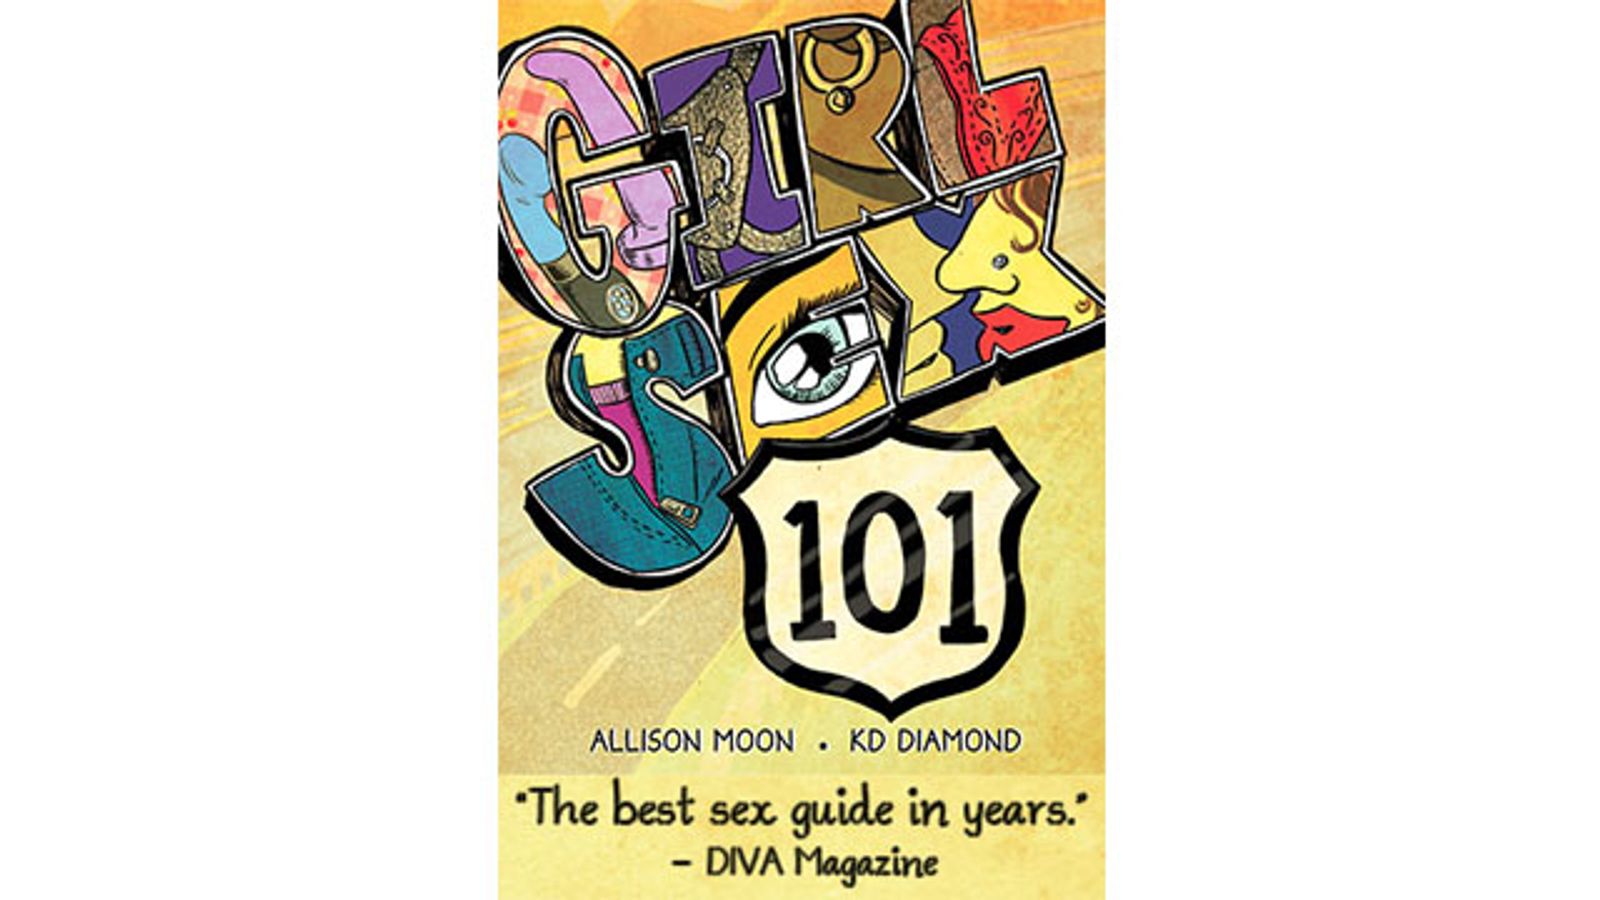 Book Signing On Saturday For ‘Girl Sex 101’